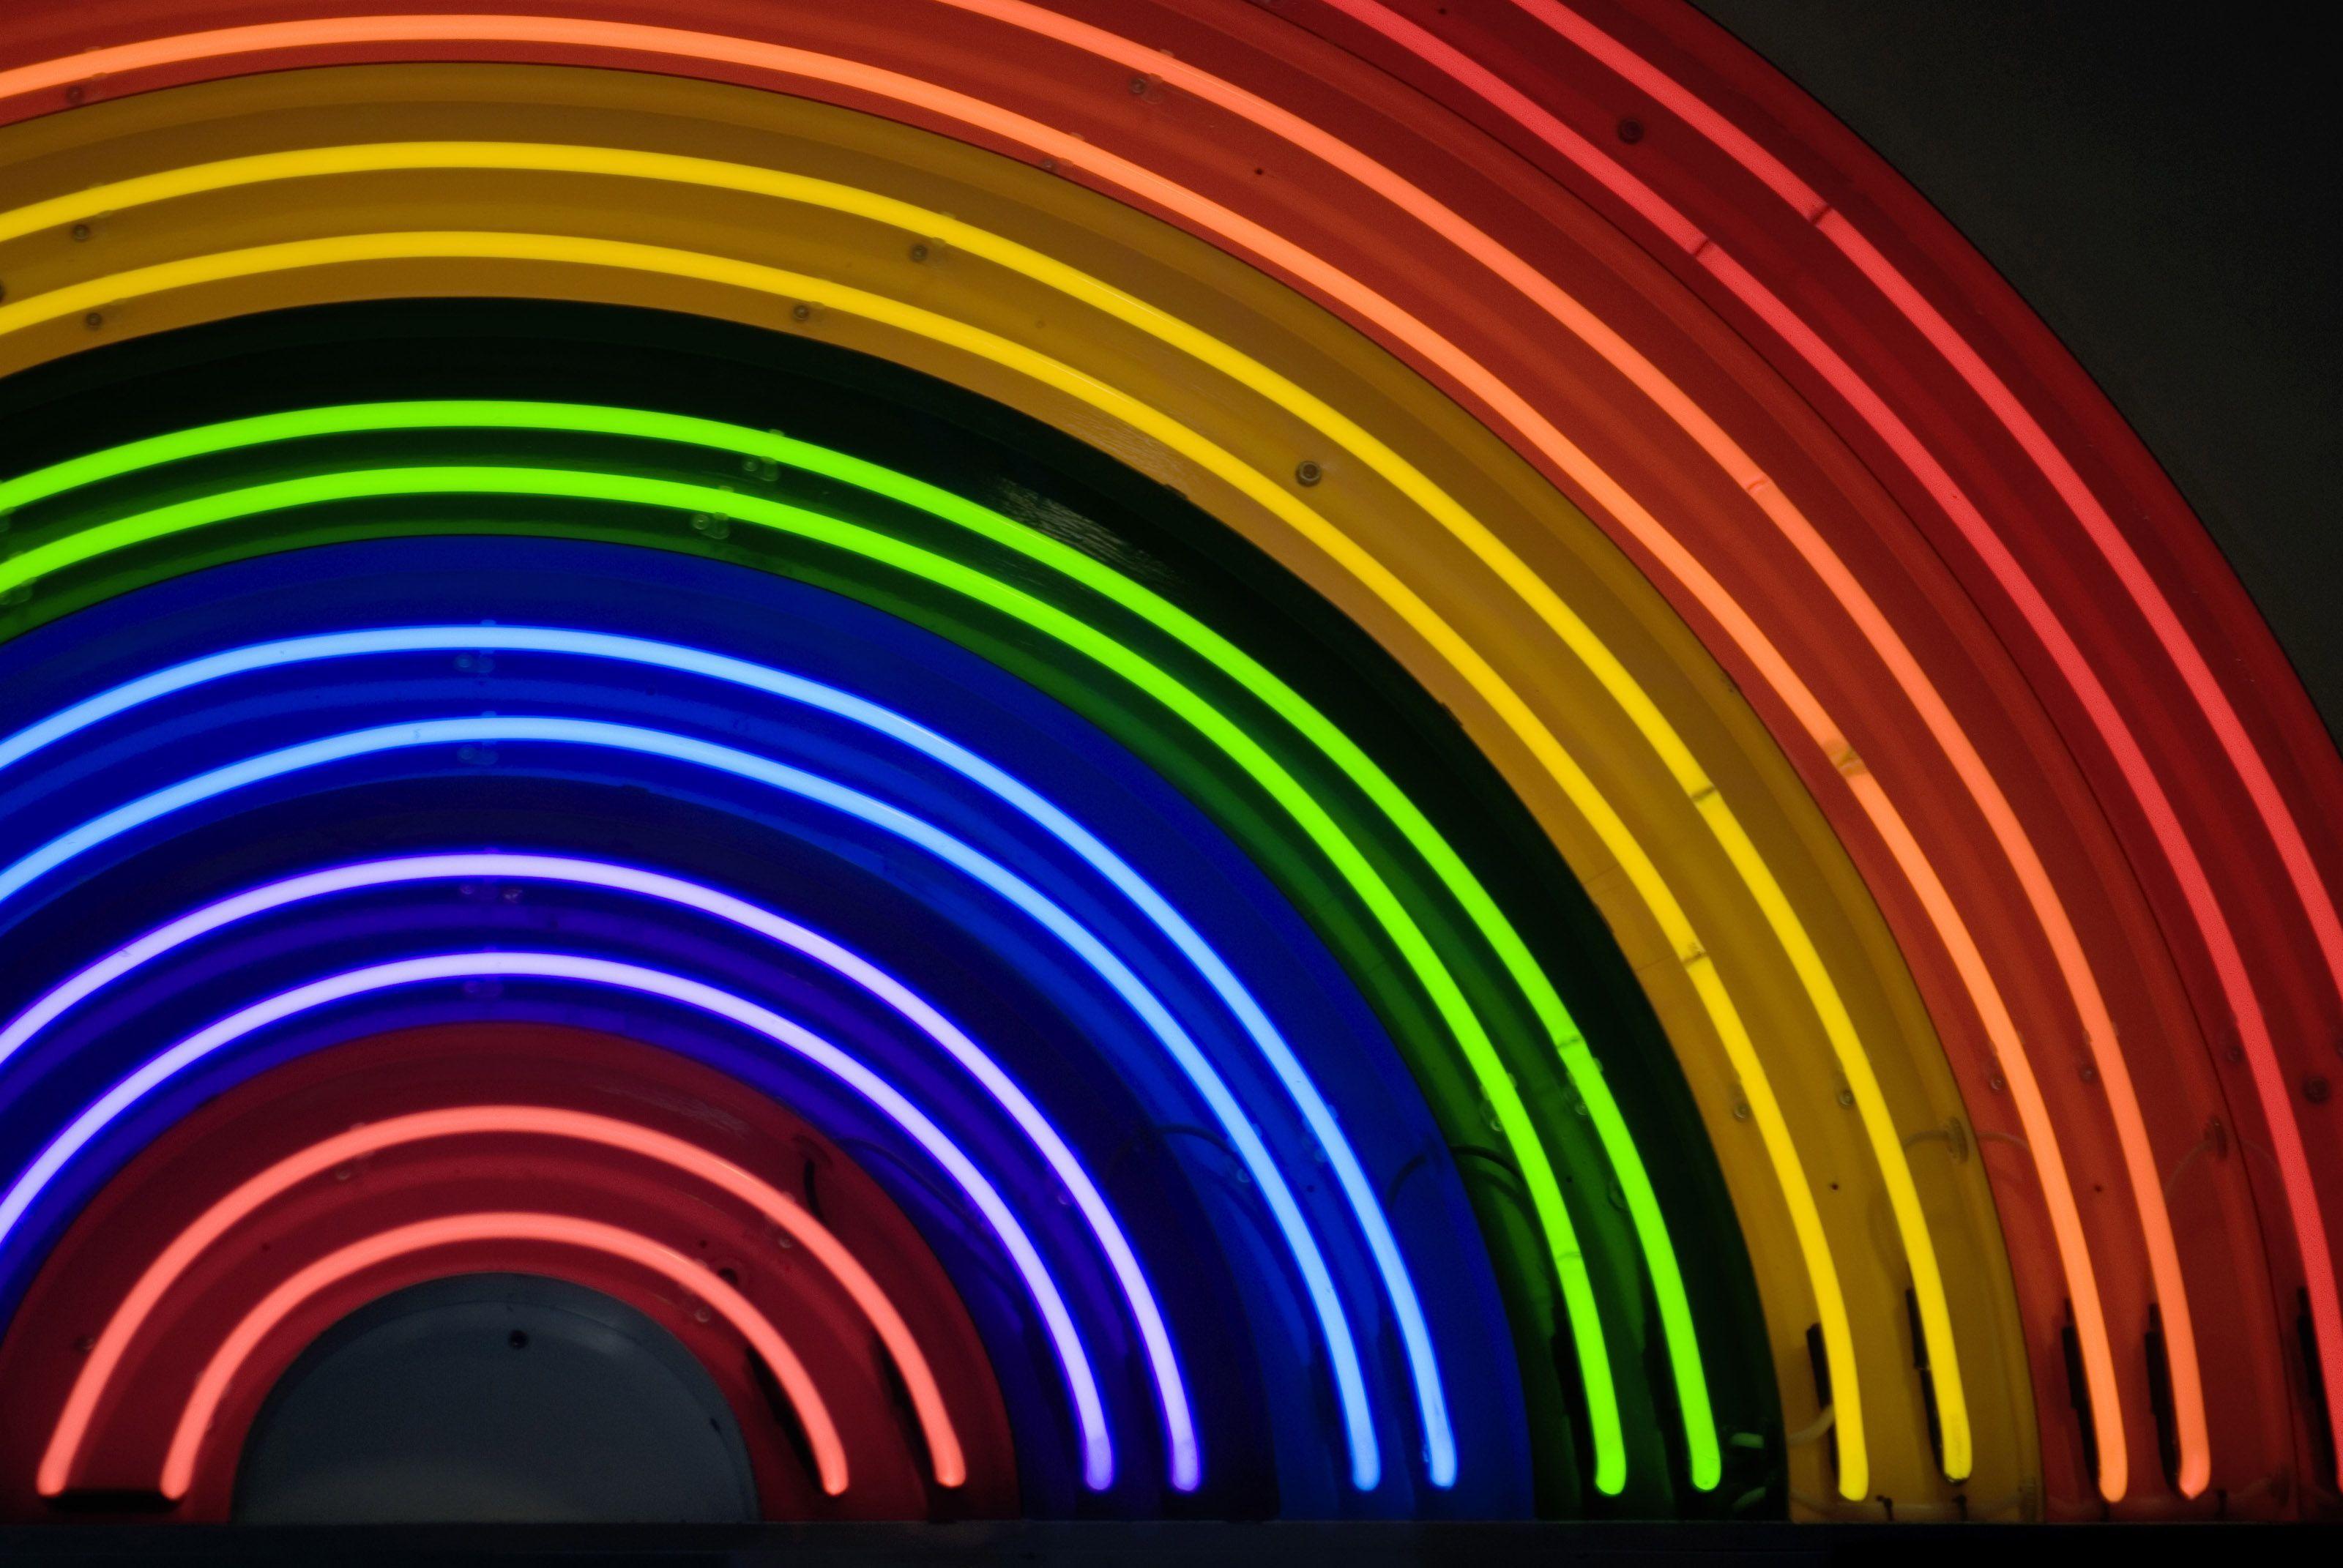 Cool Neon Things. Rainbow Neon Sign 4025. Stockarch Free Stock